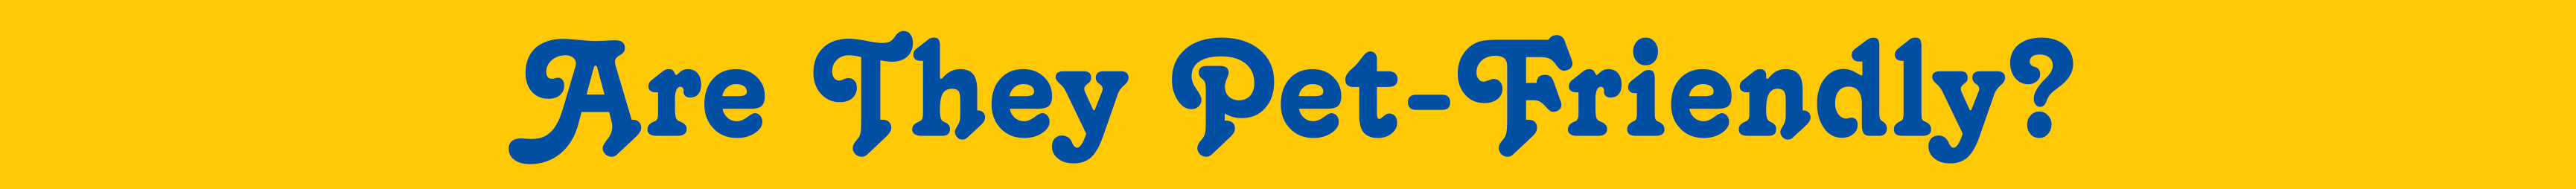 Are They Pet-Friendly?